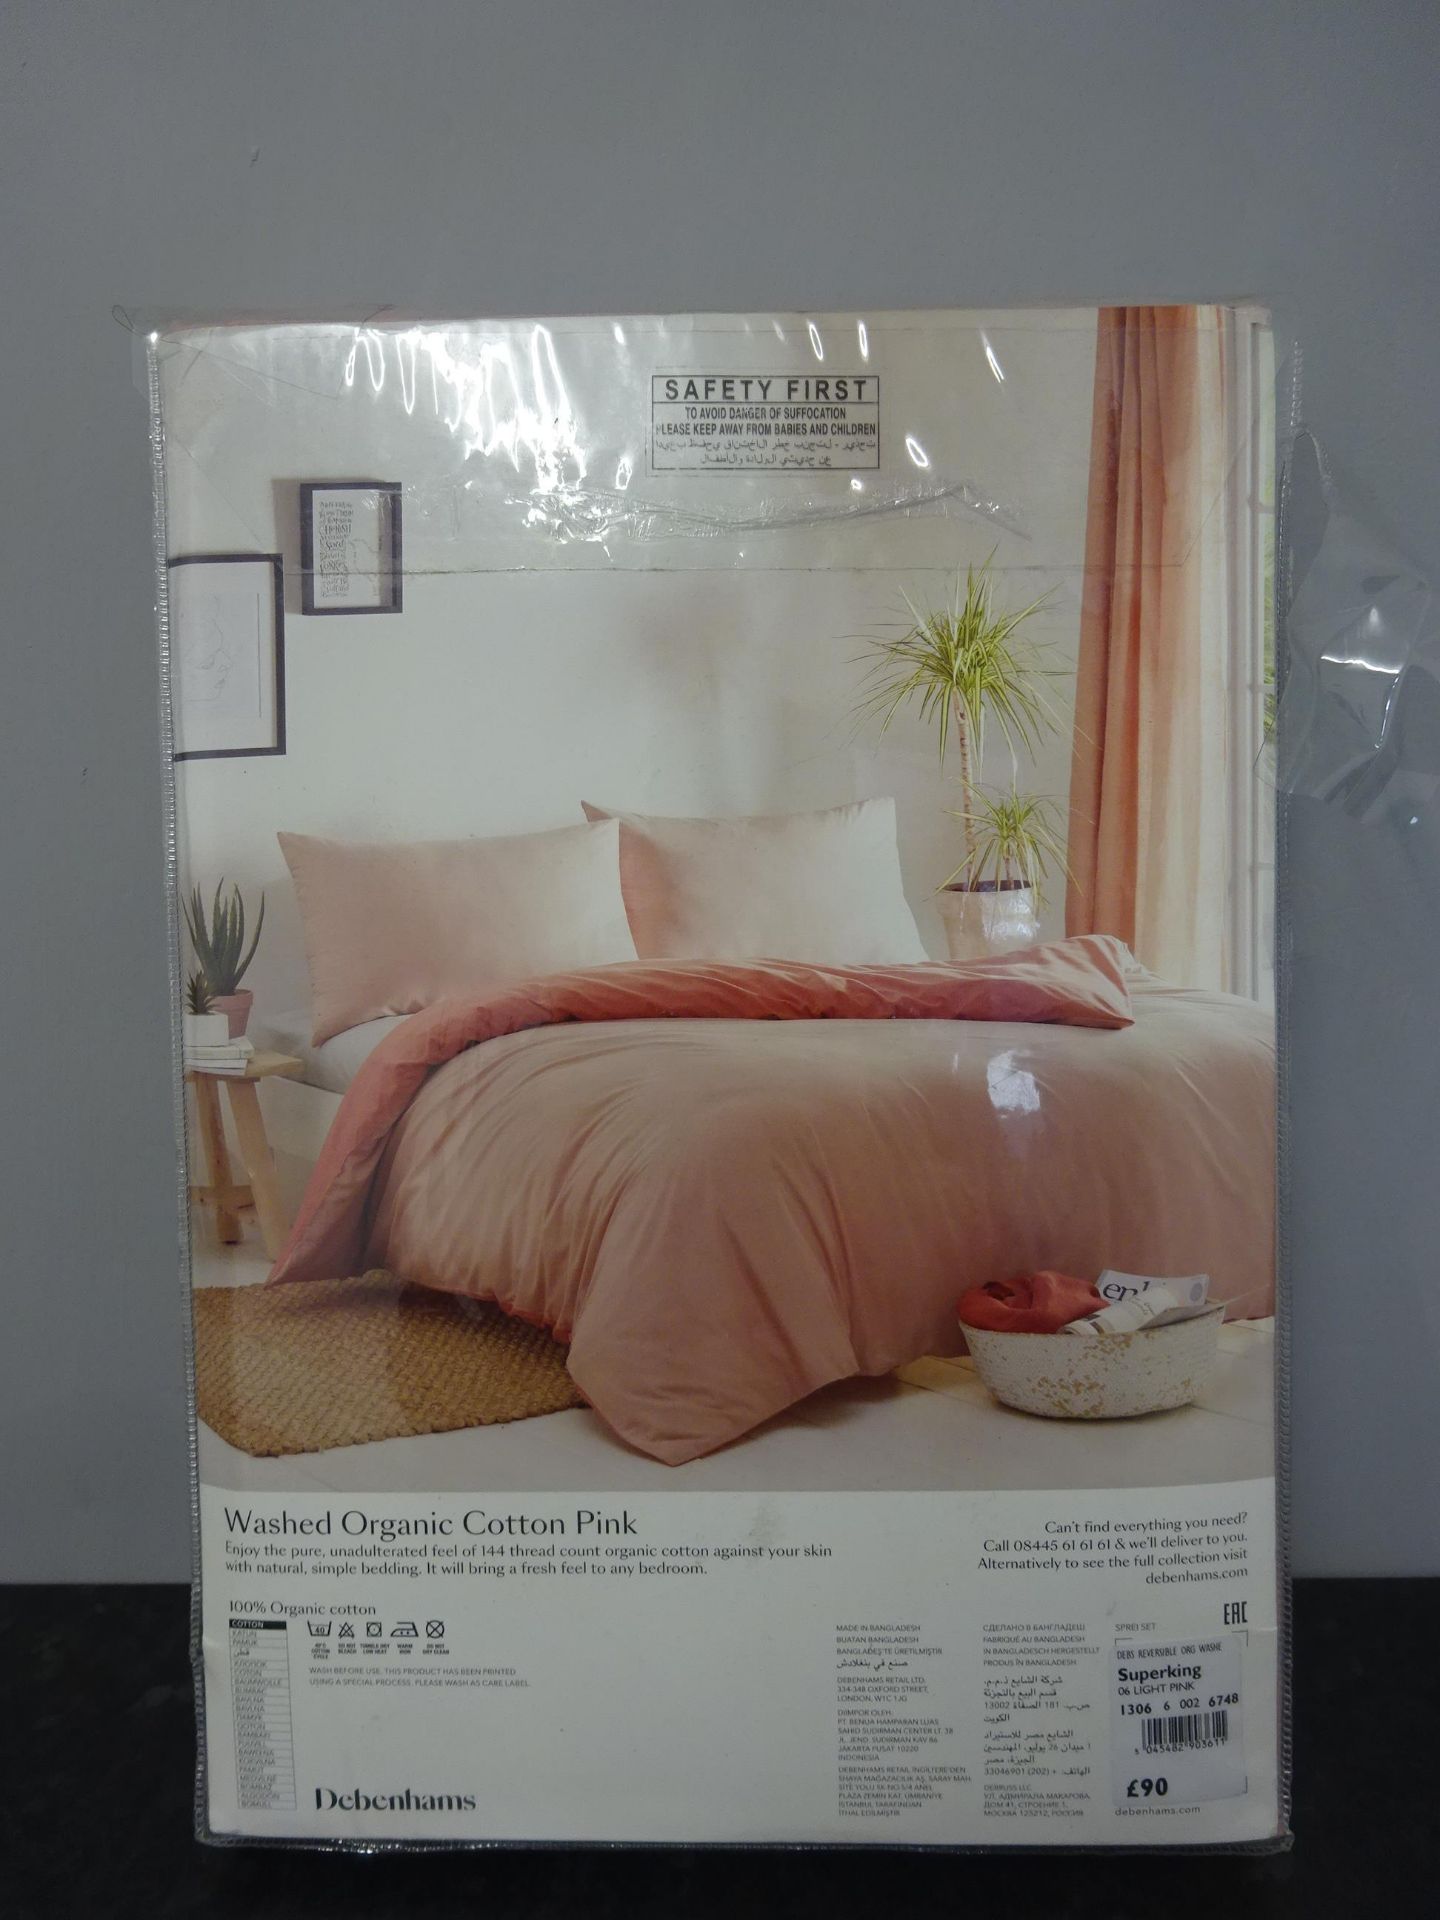 6ft Super King Pink Cotton Duvet Set With 2 Pilllow Cases - RRP £90. - Image 2 of 2